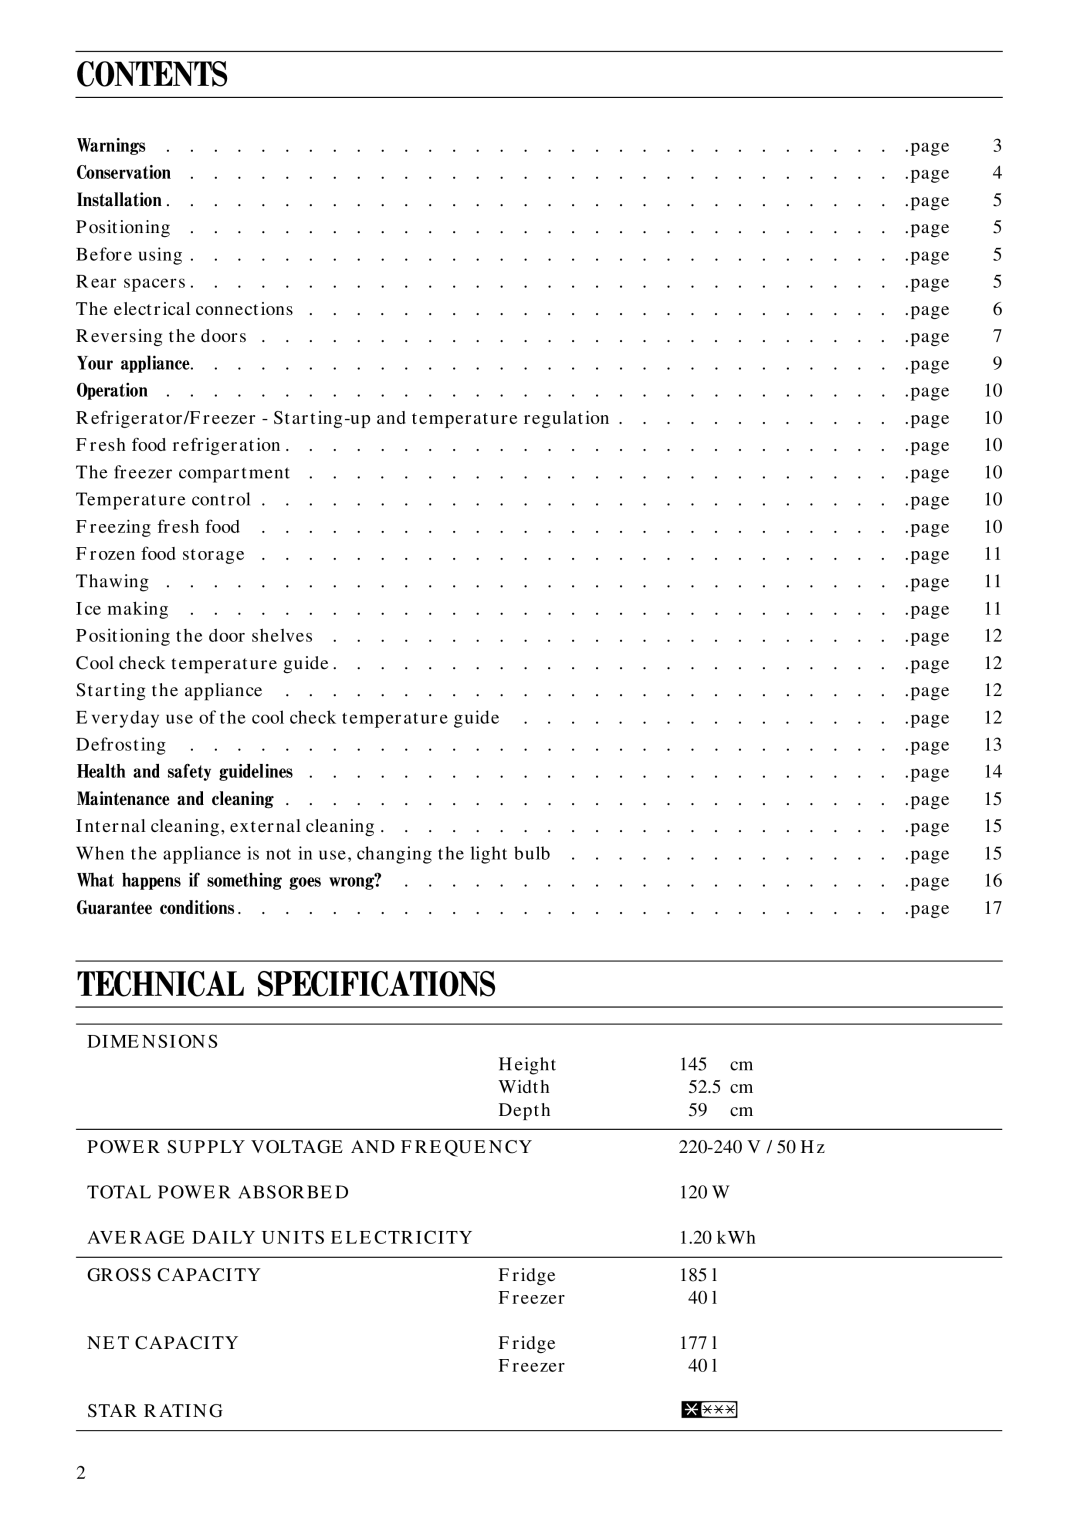 Zanussi ZFC 66/14 manual Contents, Technical Specifications 